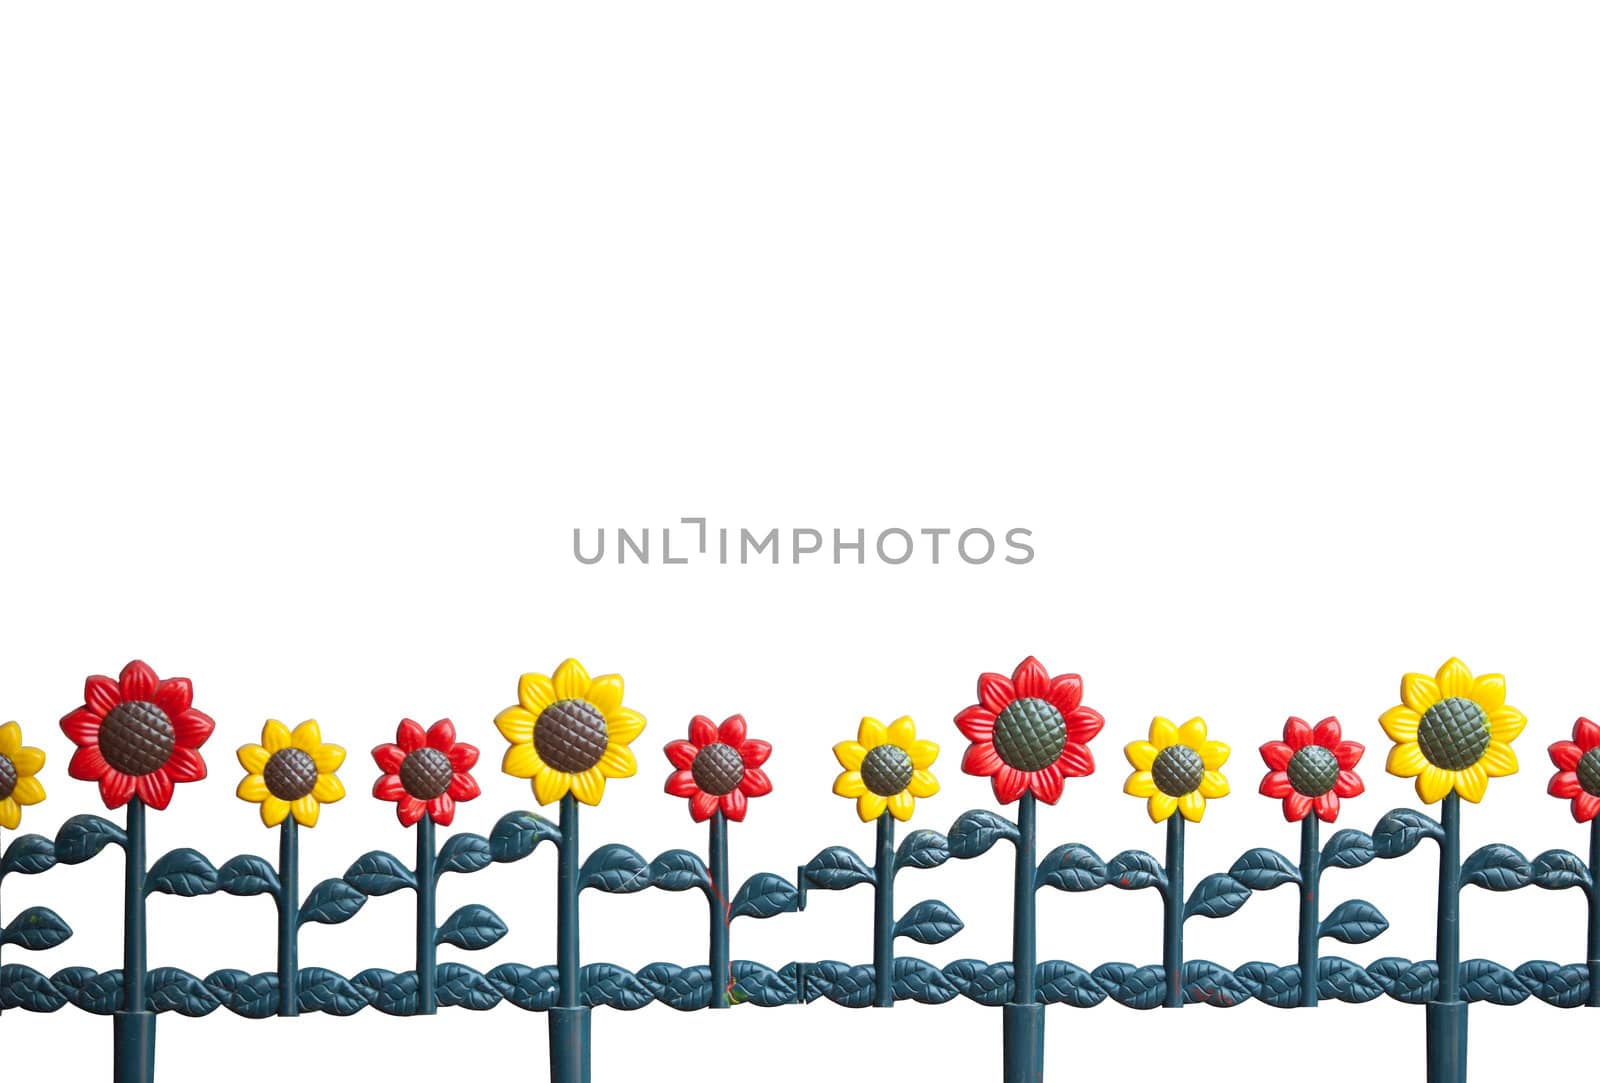 Isolate fence of metal flower